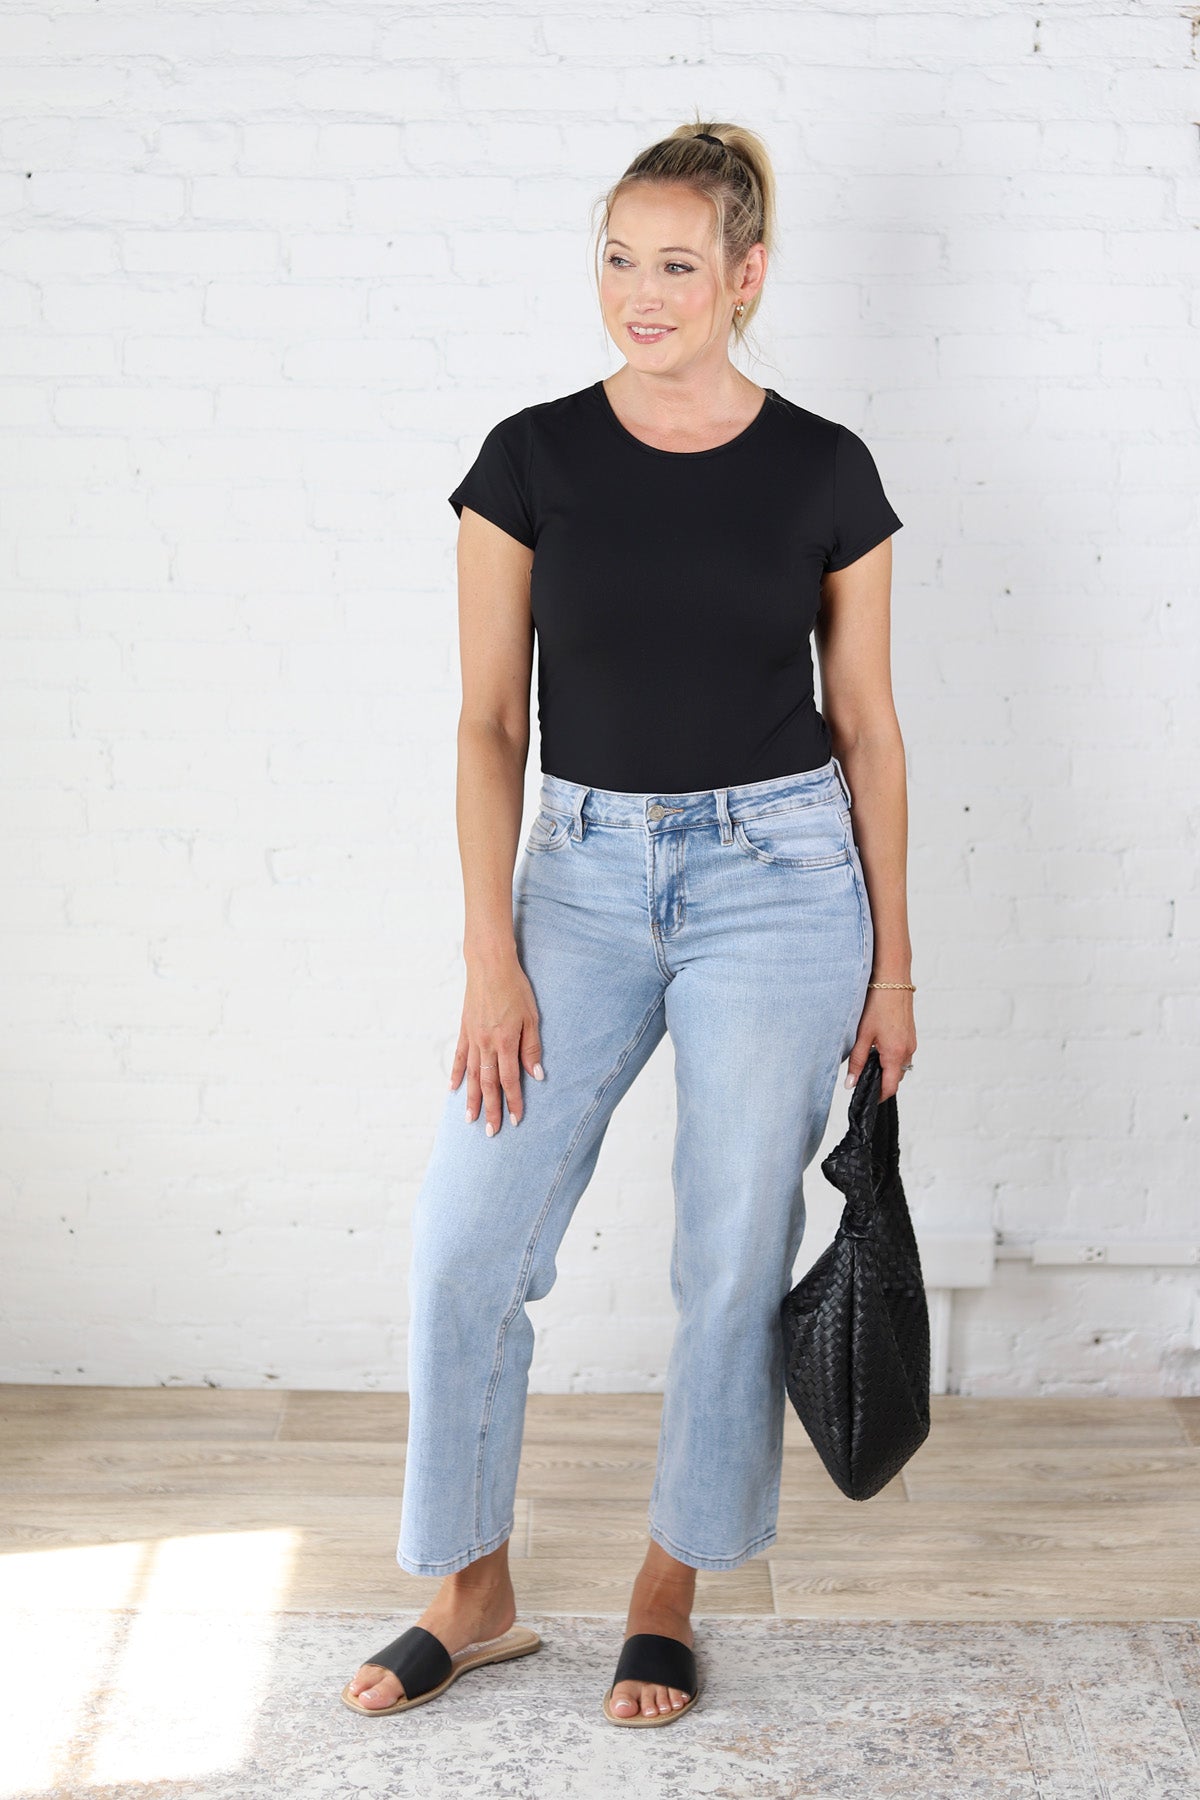 Leann Mid Rise Crop Dad Jean - Deference